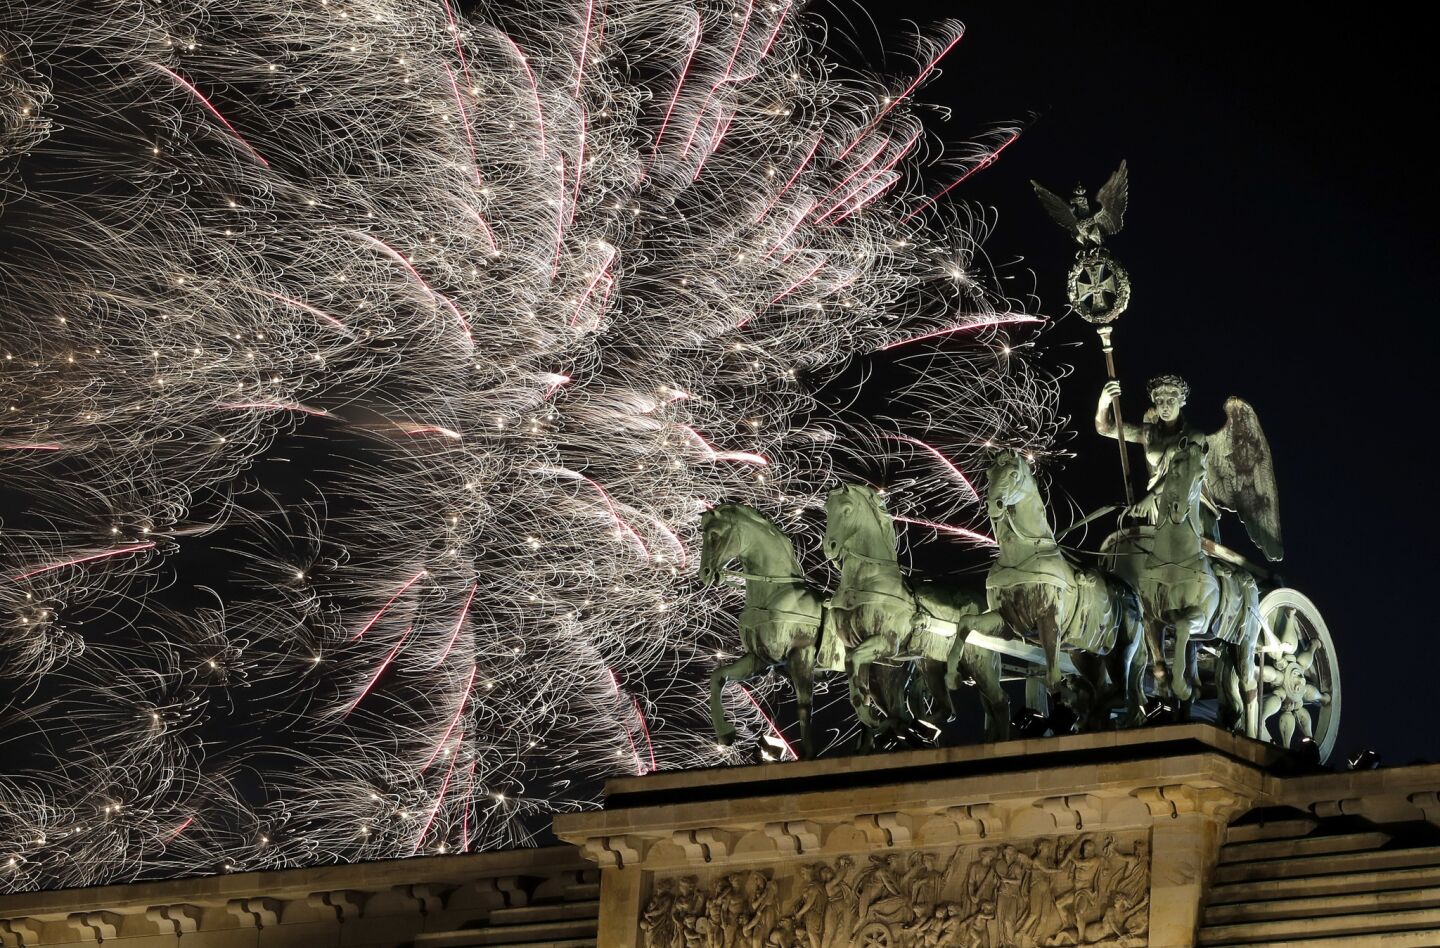 In Berlin, fireworks light up the Quadriga (a chariot and four horses) atop the Brandenburg Gate.